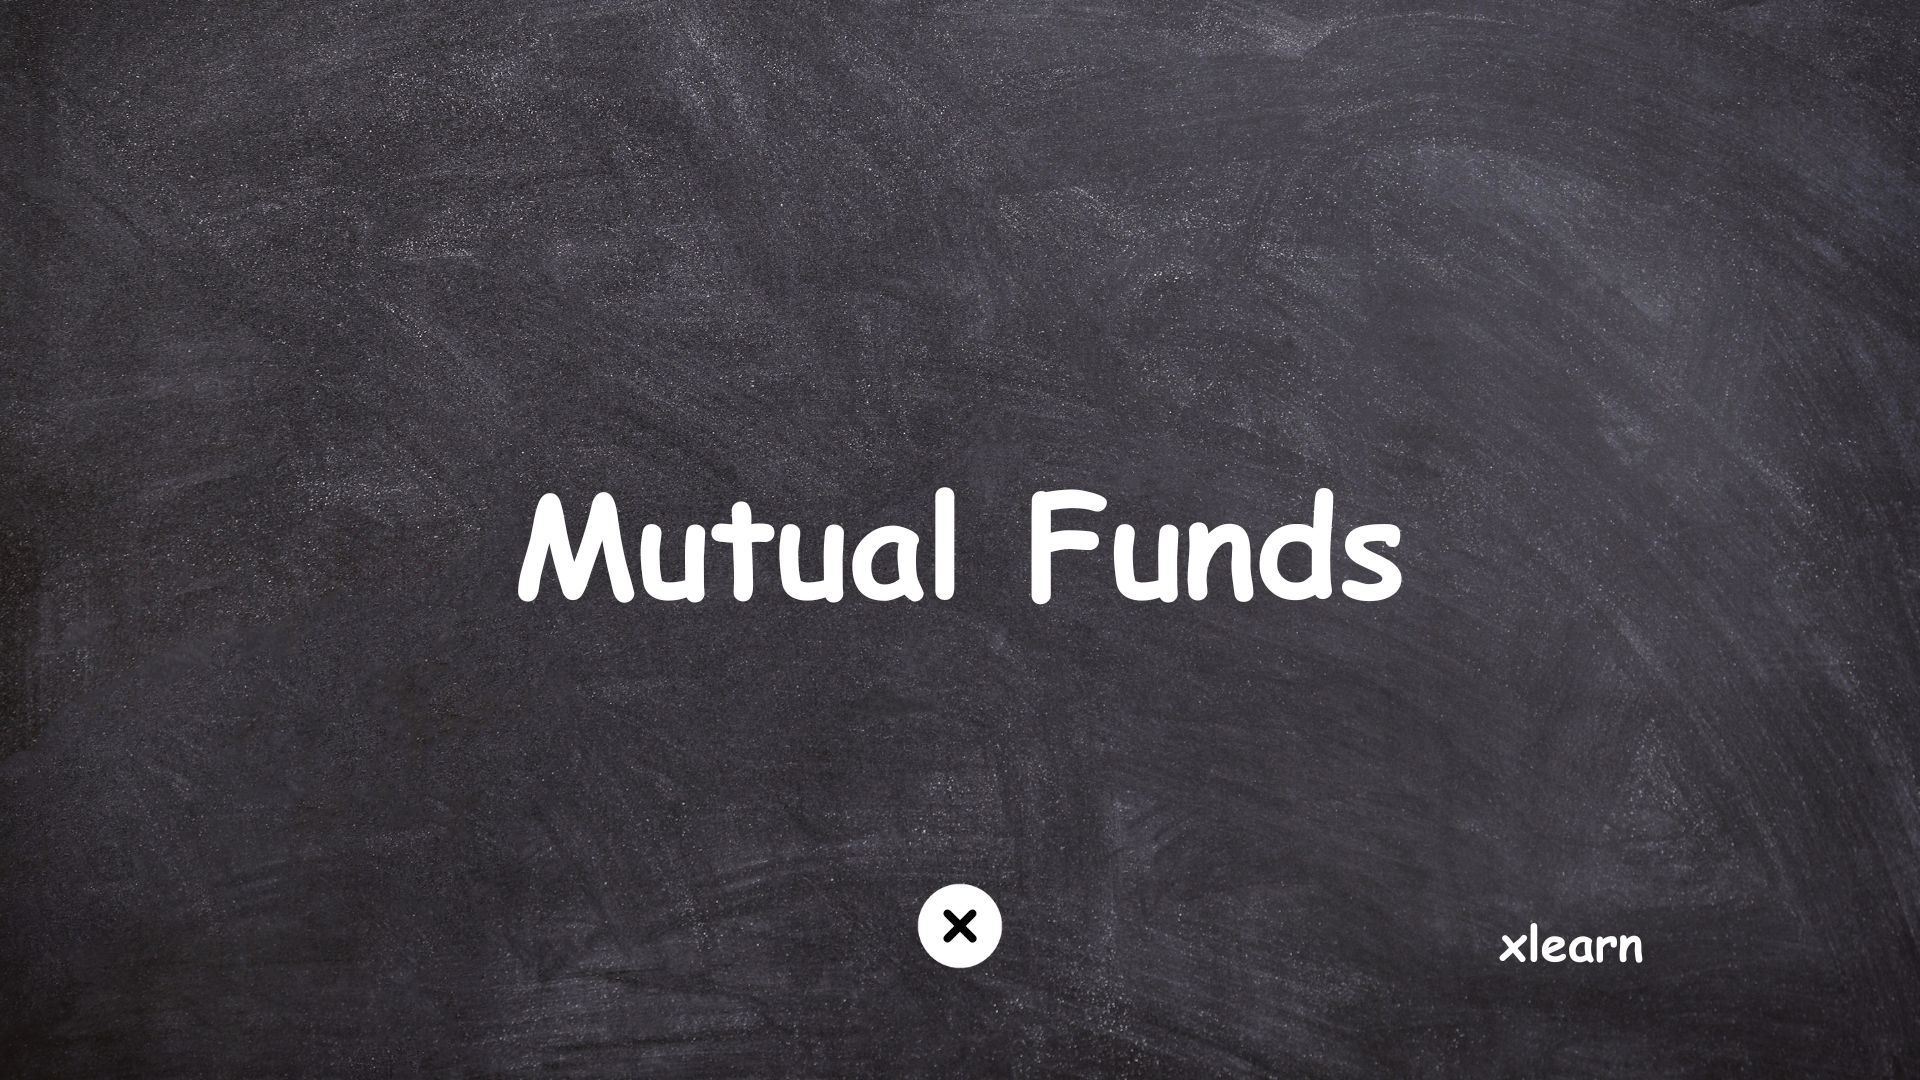 What are mutual funds?